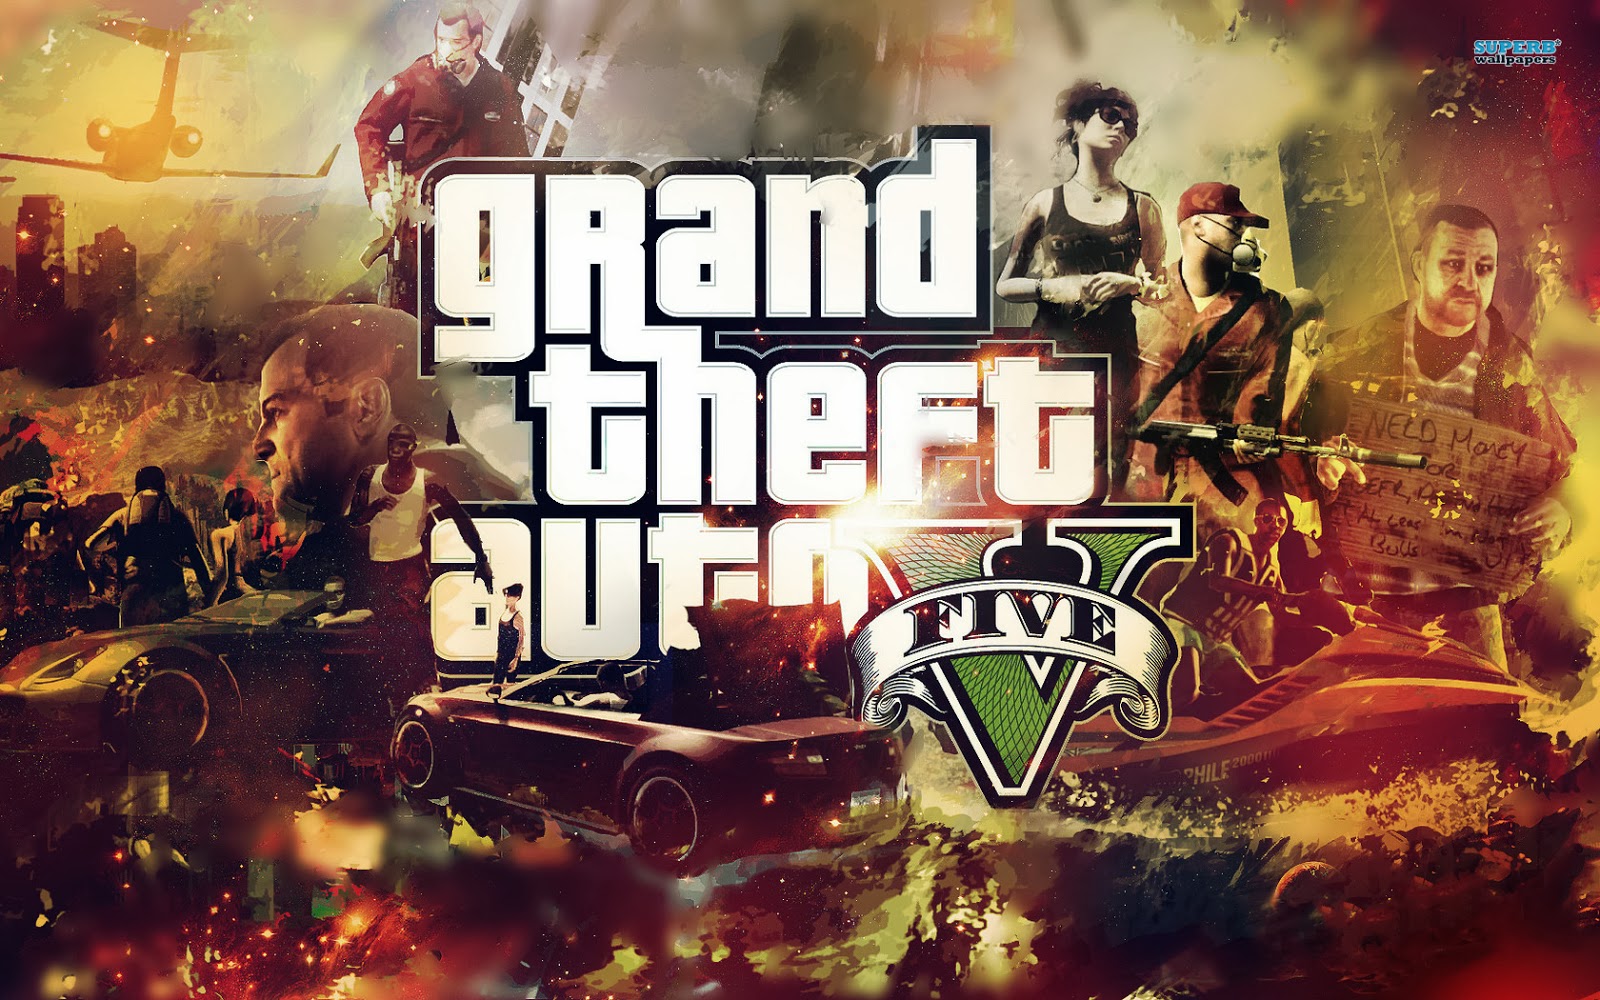 Background You Can This Gta V Wallpaper By Right Clicking